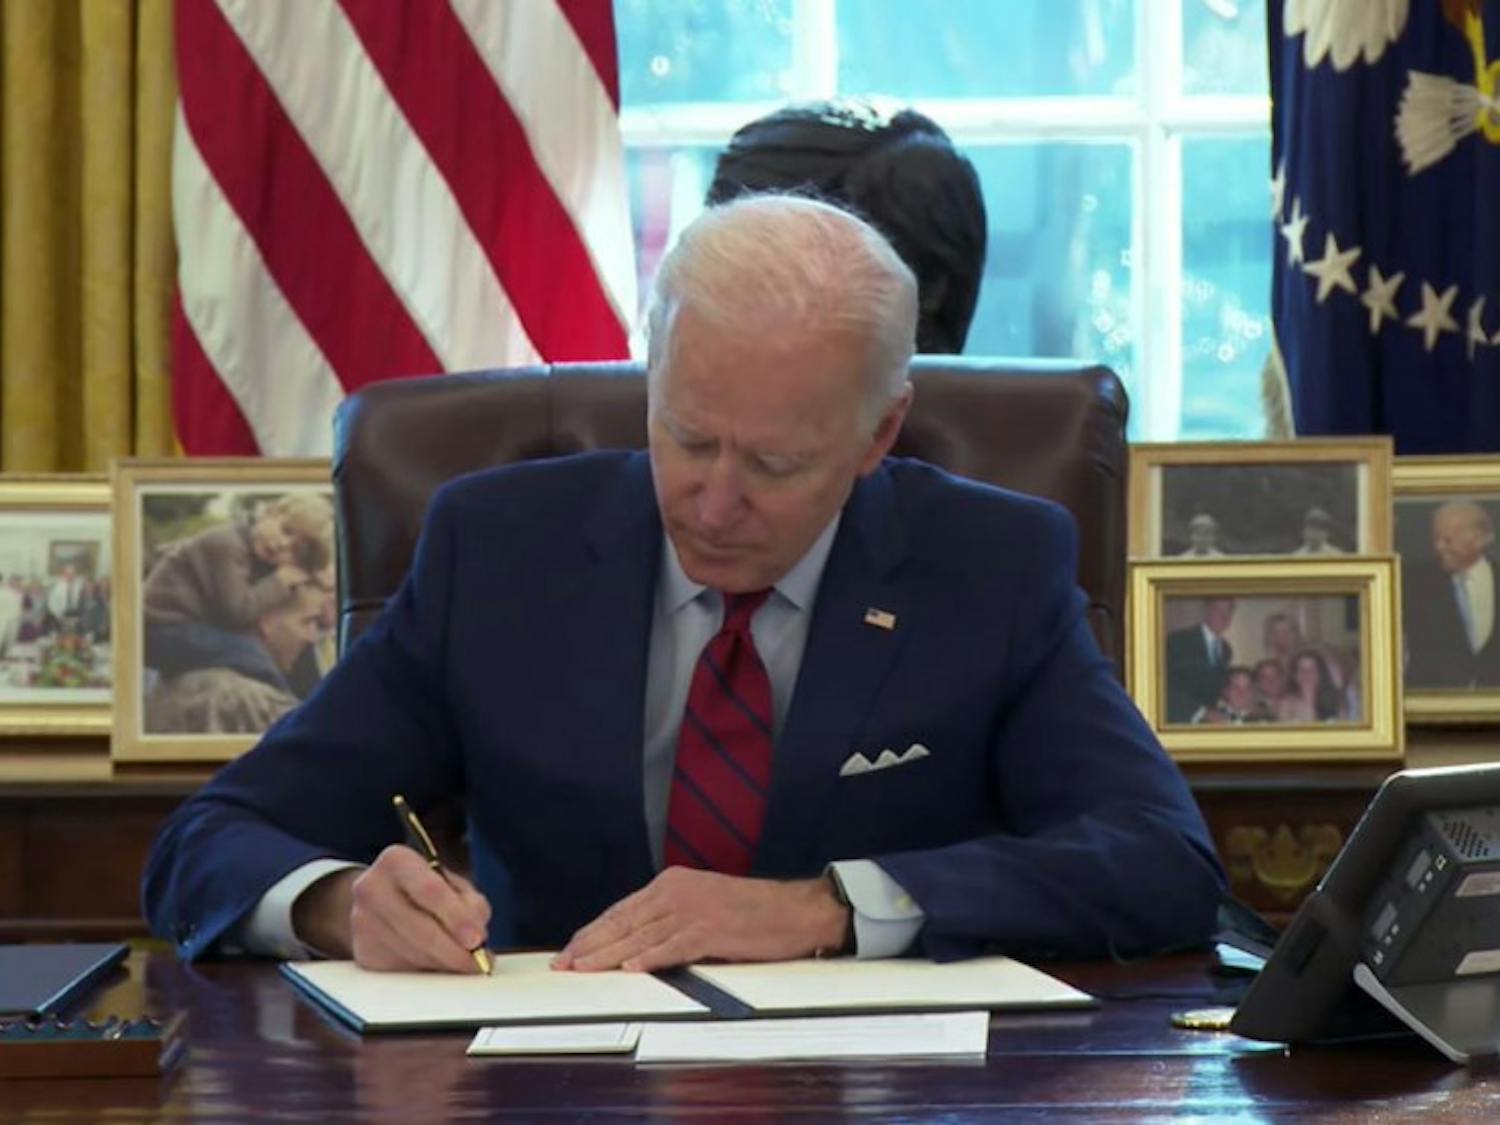 Biden_signing_an_executive_order_related_to_the_Affordable_Care_Act_and_Medicaid